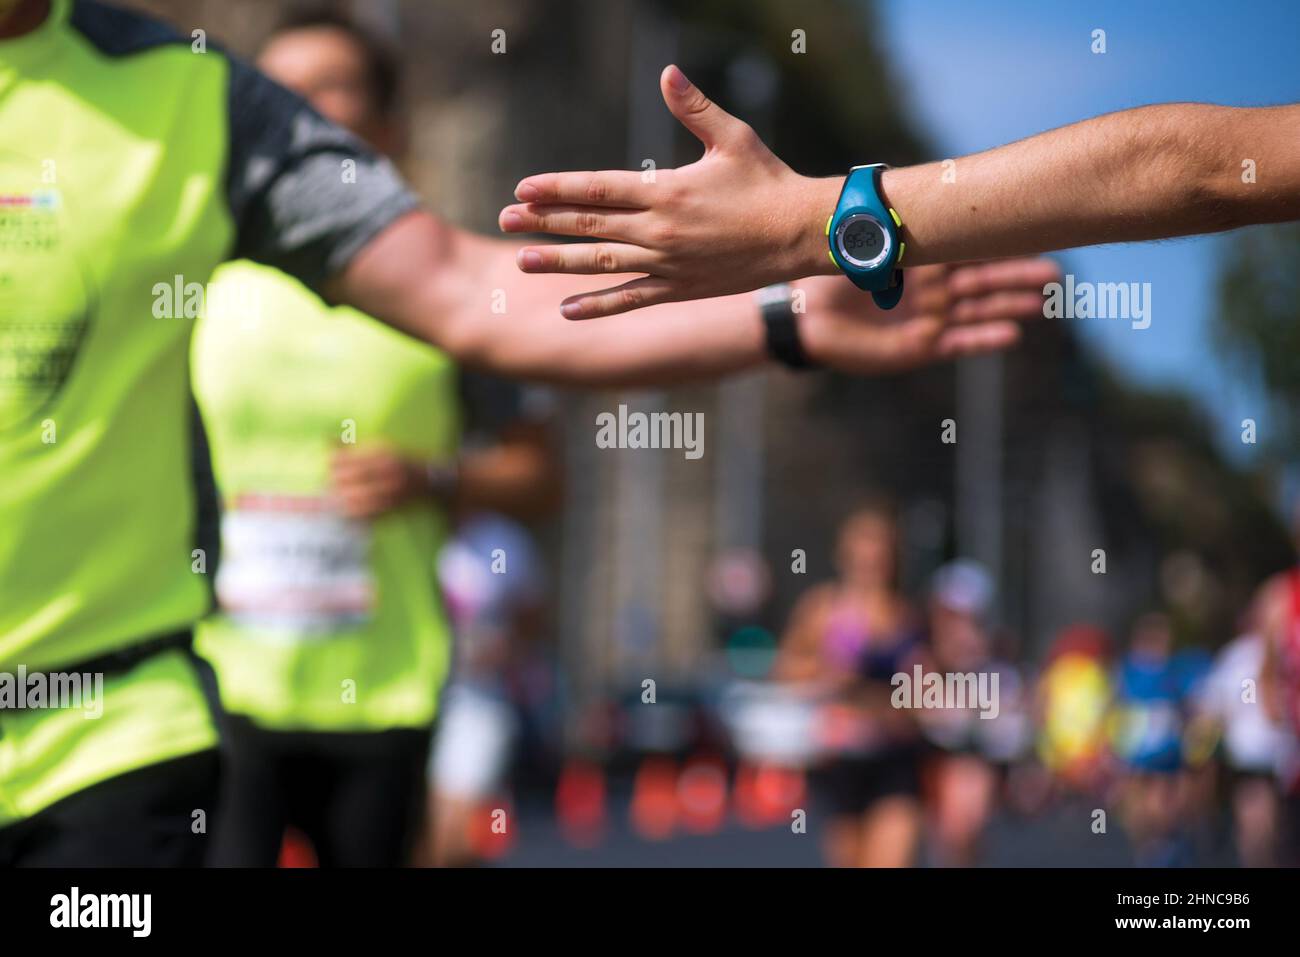 Clap hands of a runner and child fan Stock Photo